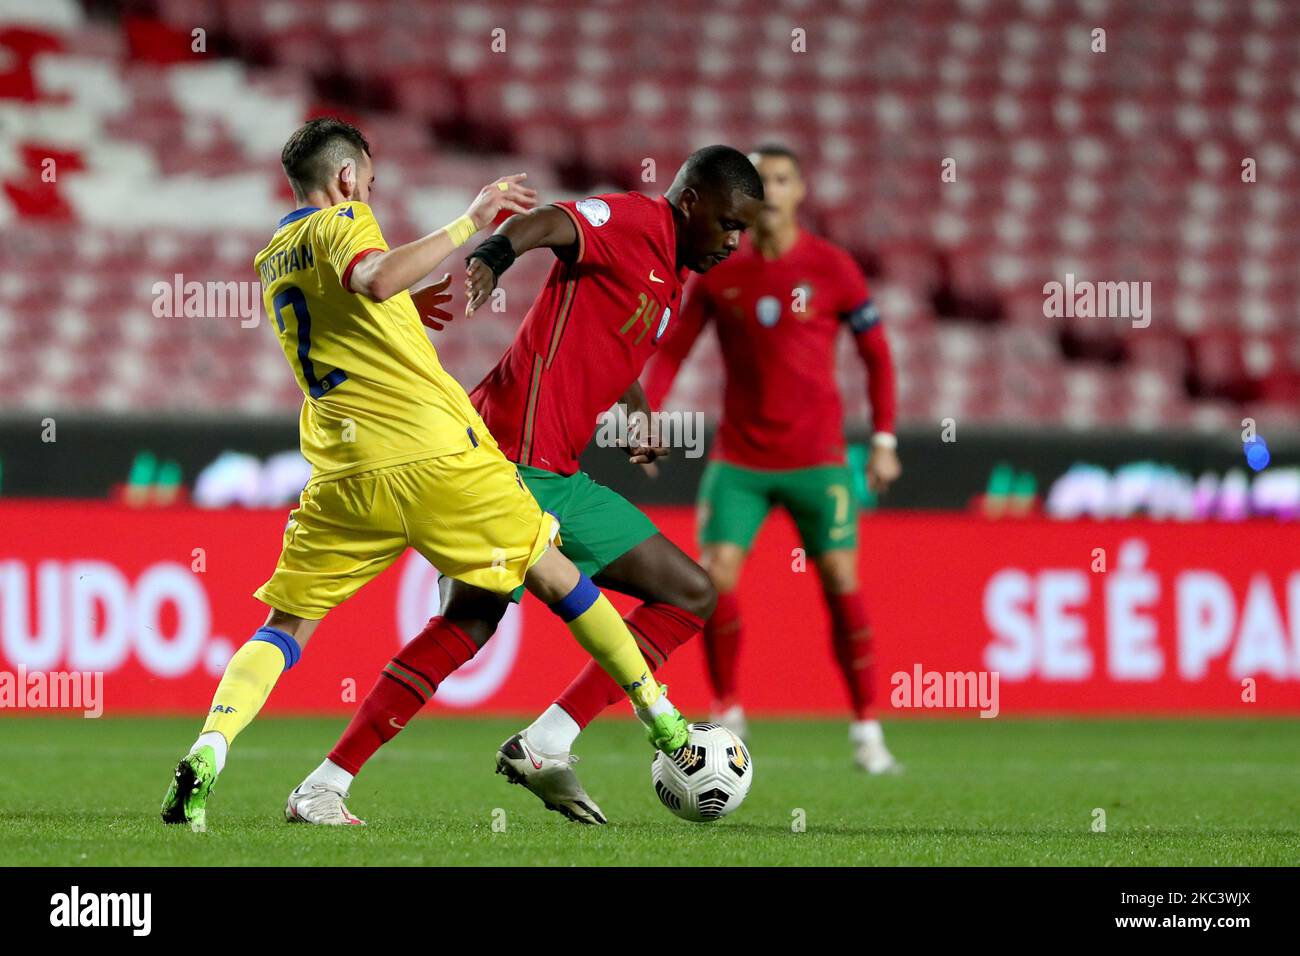 William Carvalho of Portugal (R ) vies with Cristian Martinez of Andorra during the friendly football match between Portugal and Andorra, at the Luz stadium in Lisbon, Portugal, on November 11, 2020. (Photo by Pedro FiÃºza/NurPhoto) Stock Photo